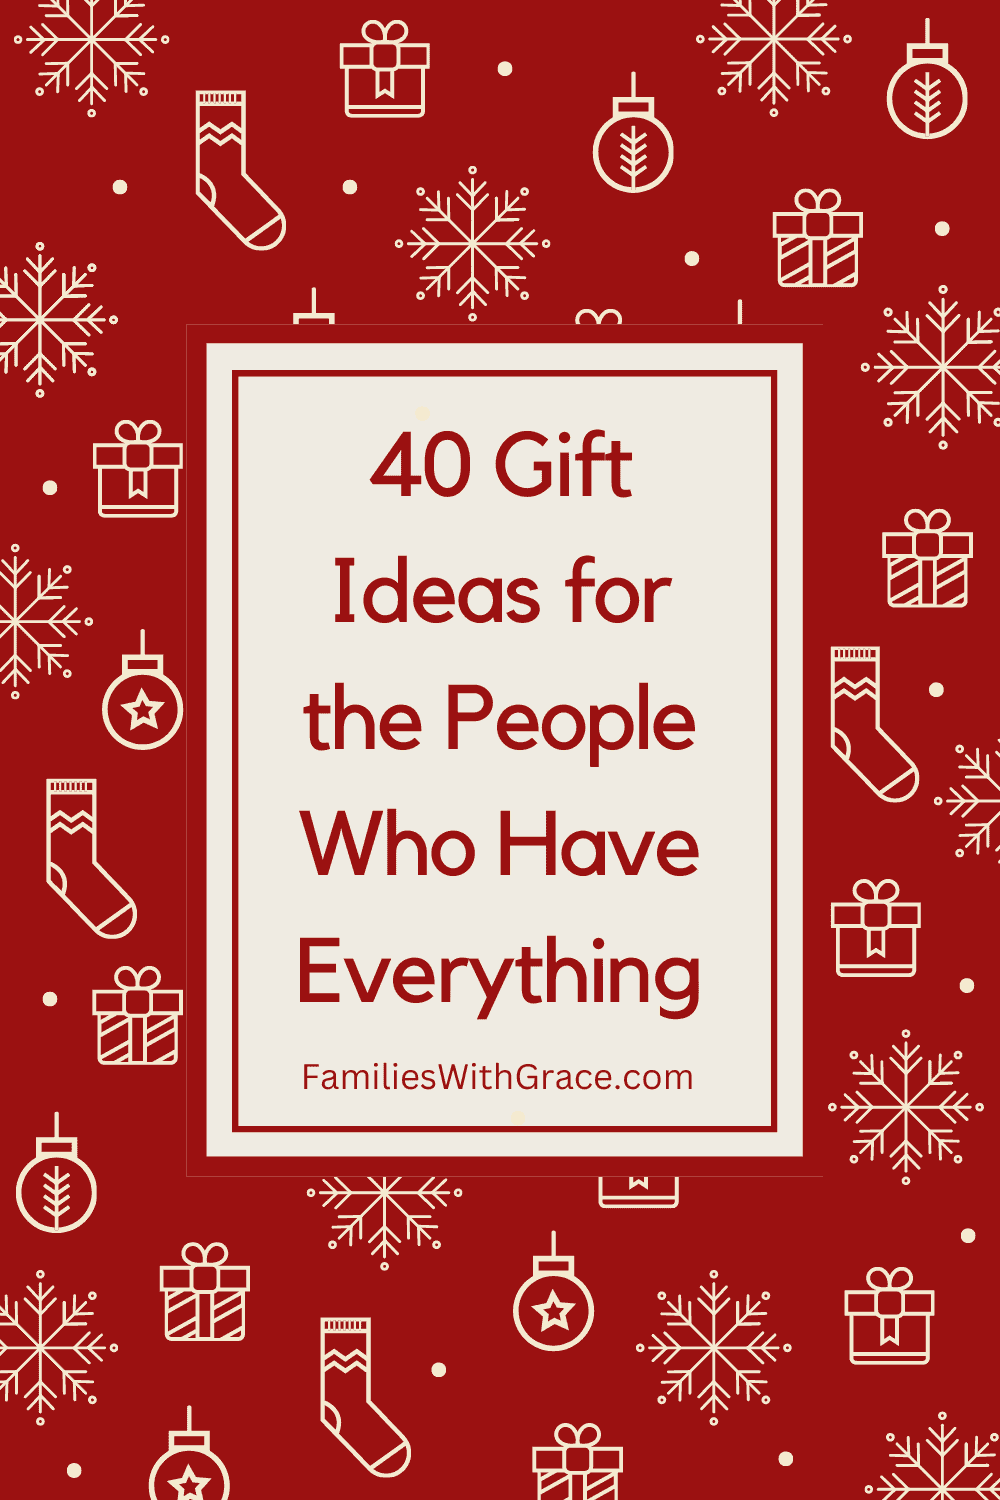 Christmas gift ideas for people who are hard to shop for